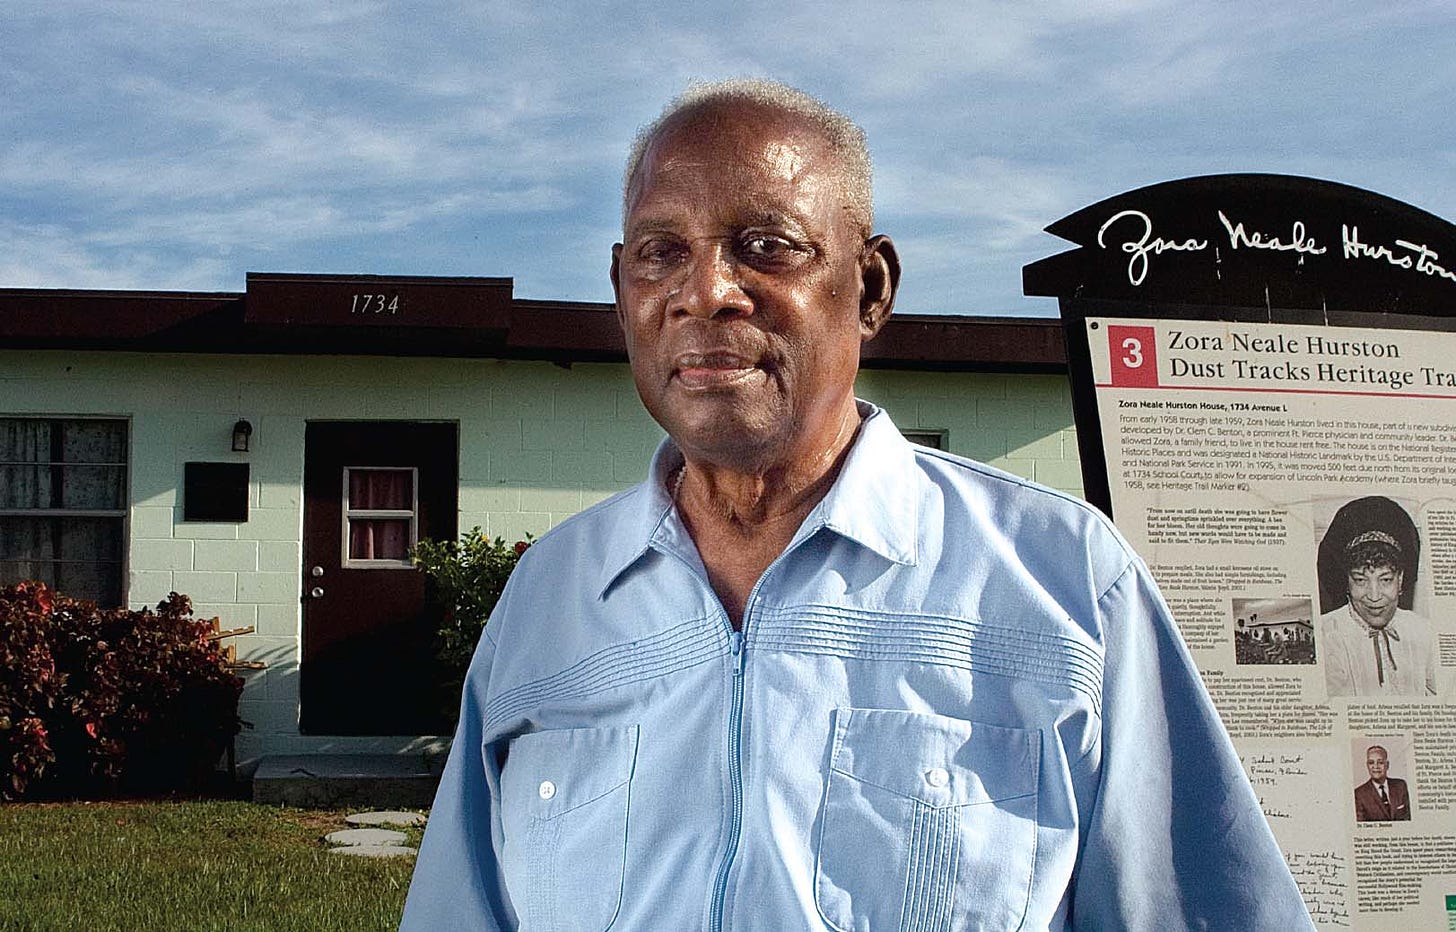 photo of an older black man in a blue collared shirt standing in front of a boxy green house and a sign that identifies the house as Zora Neale Hurston's